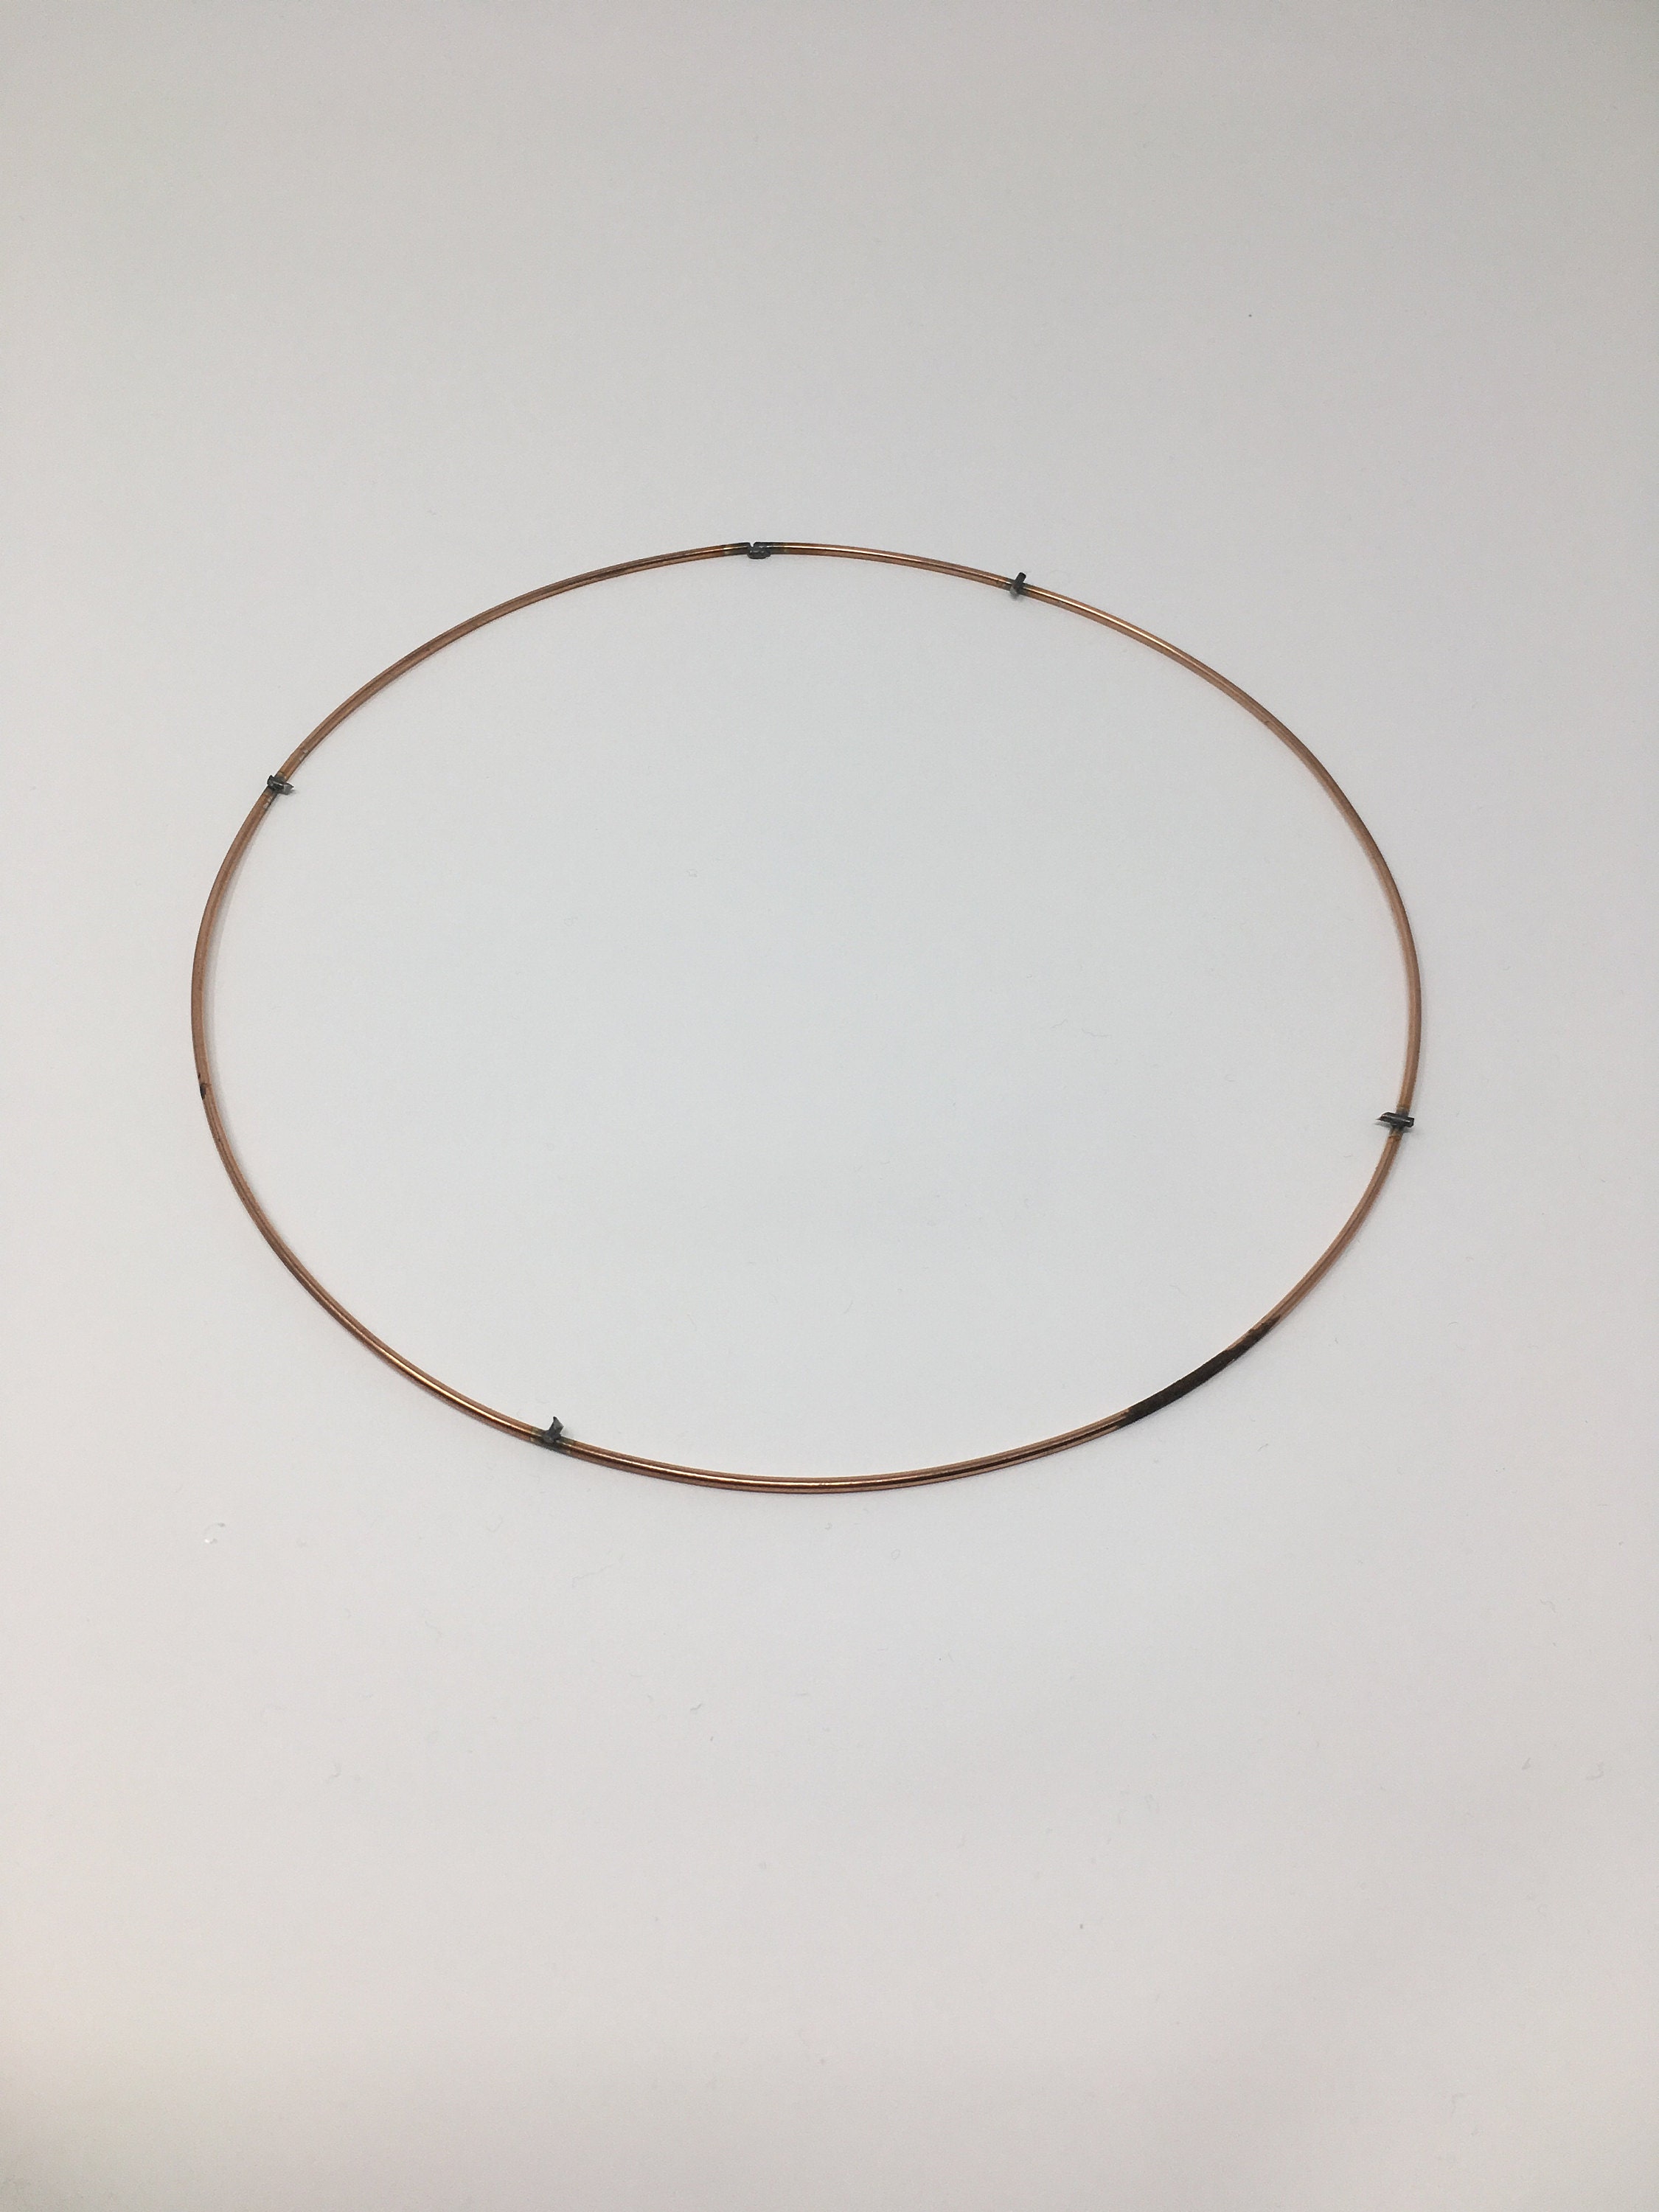 Wreath ring with the inner hoop and connectors removed